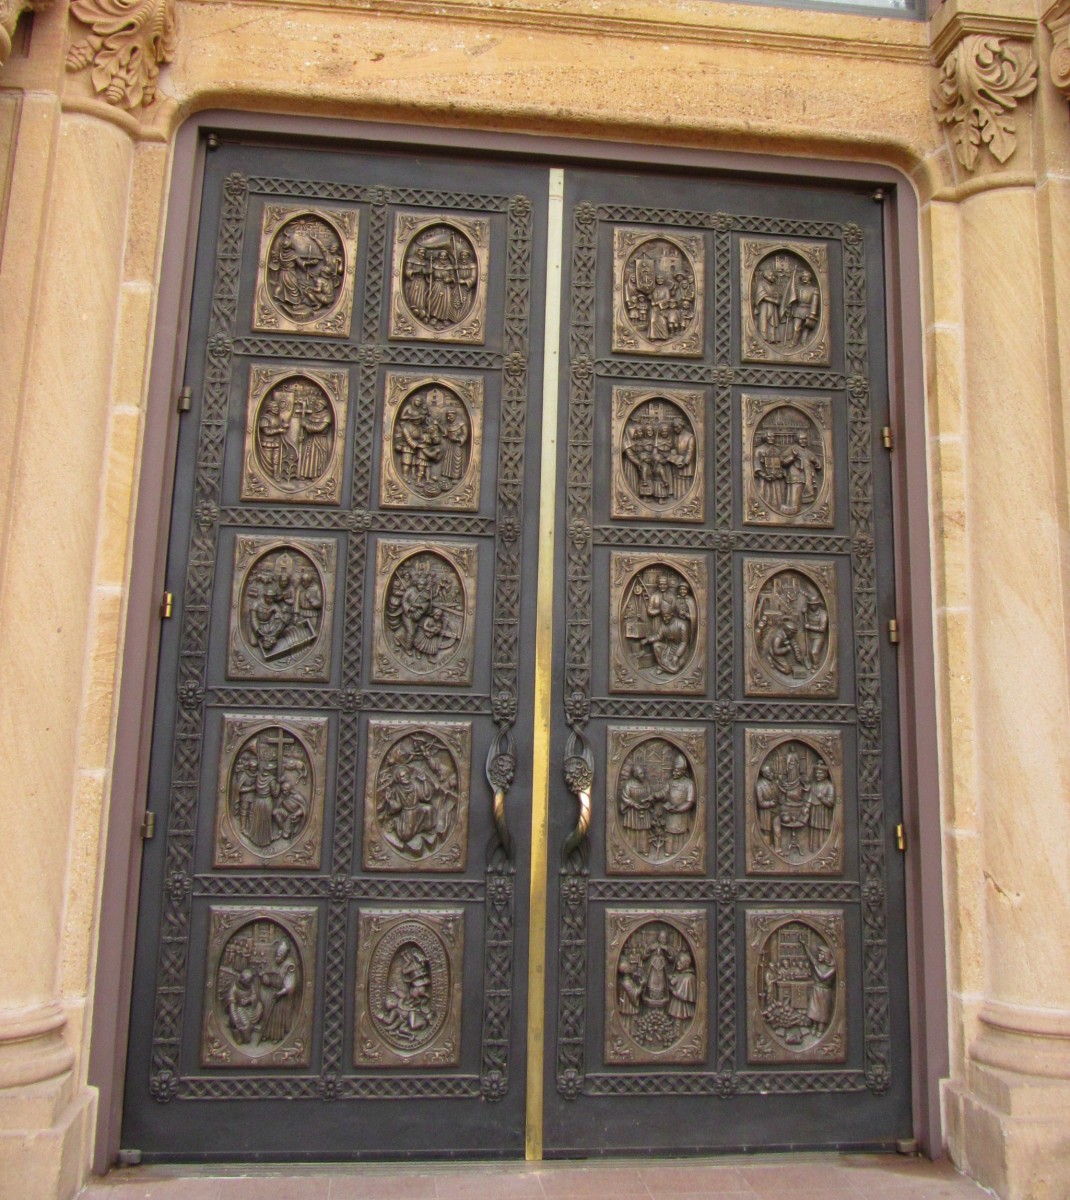 Bronze doors, made in 1986, on the front of the cathedral